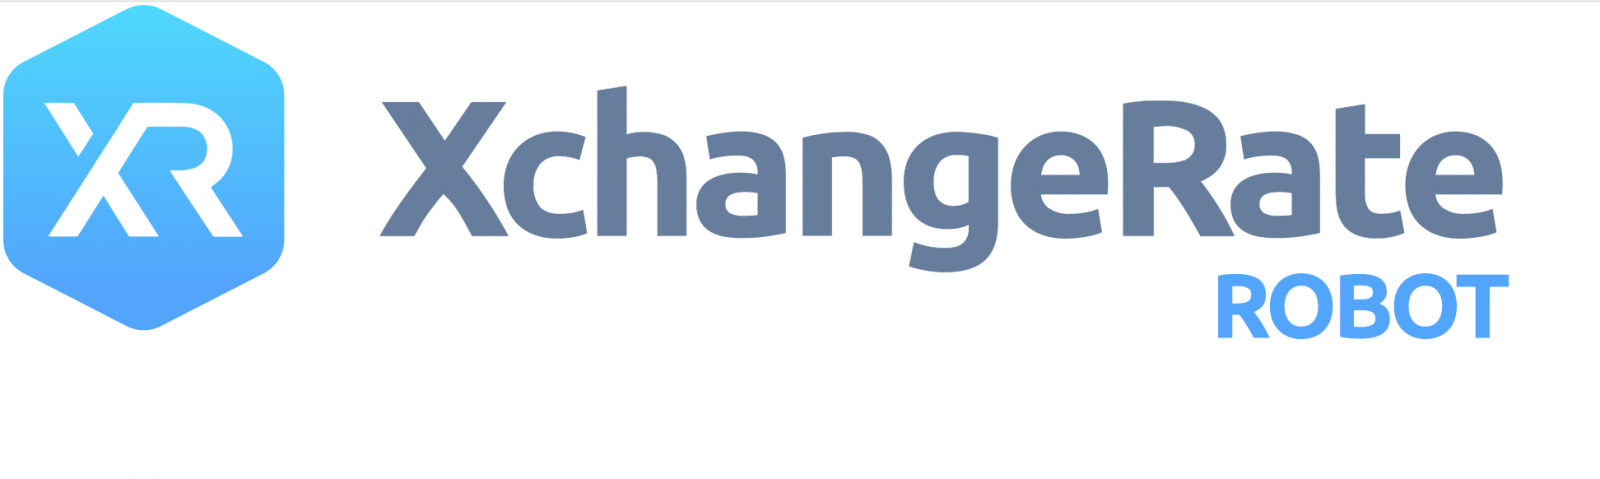 Image result for XchangeRate token